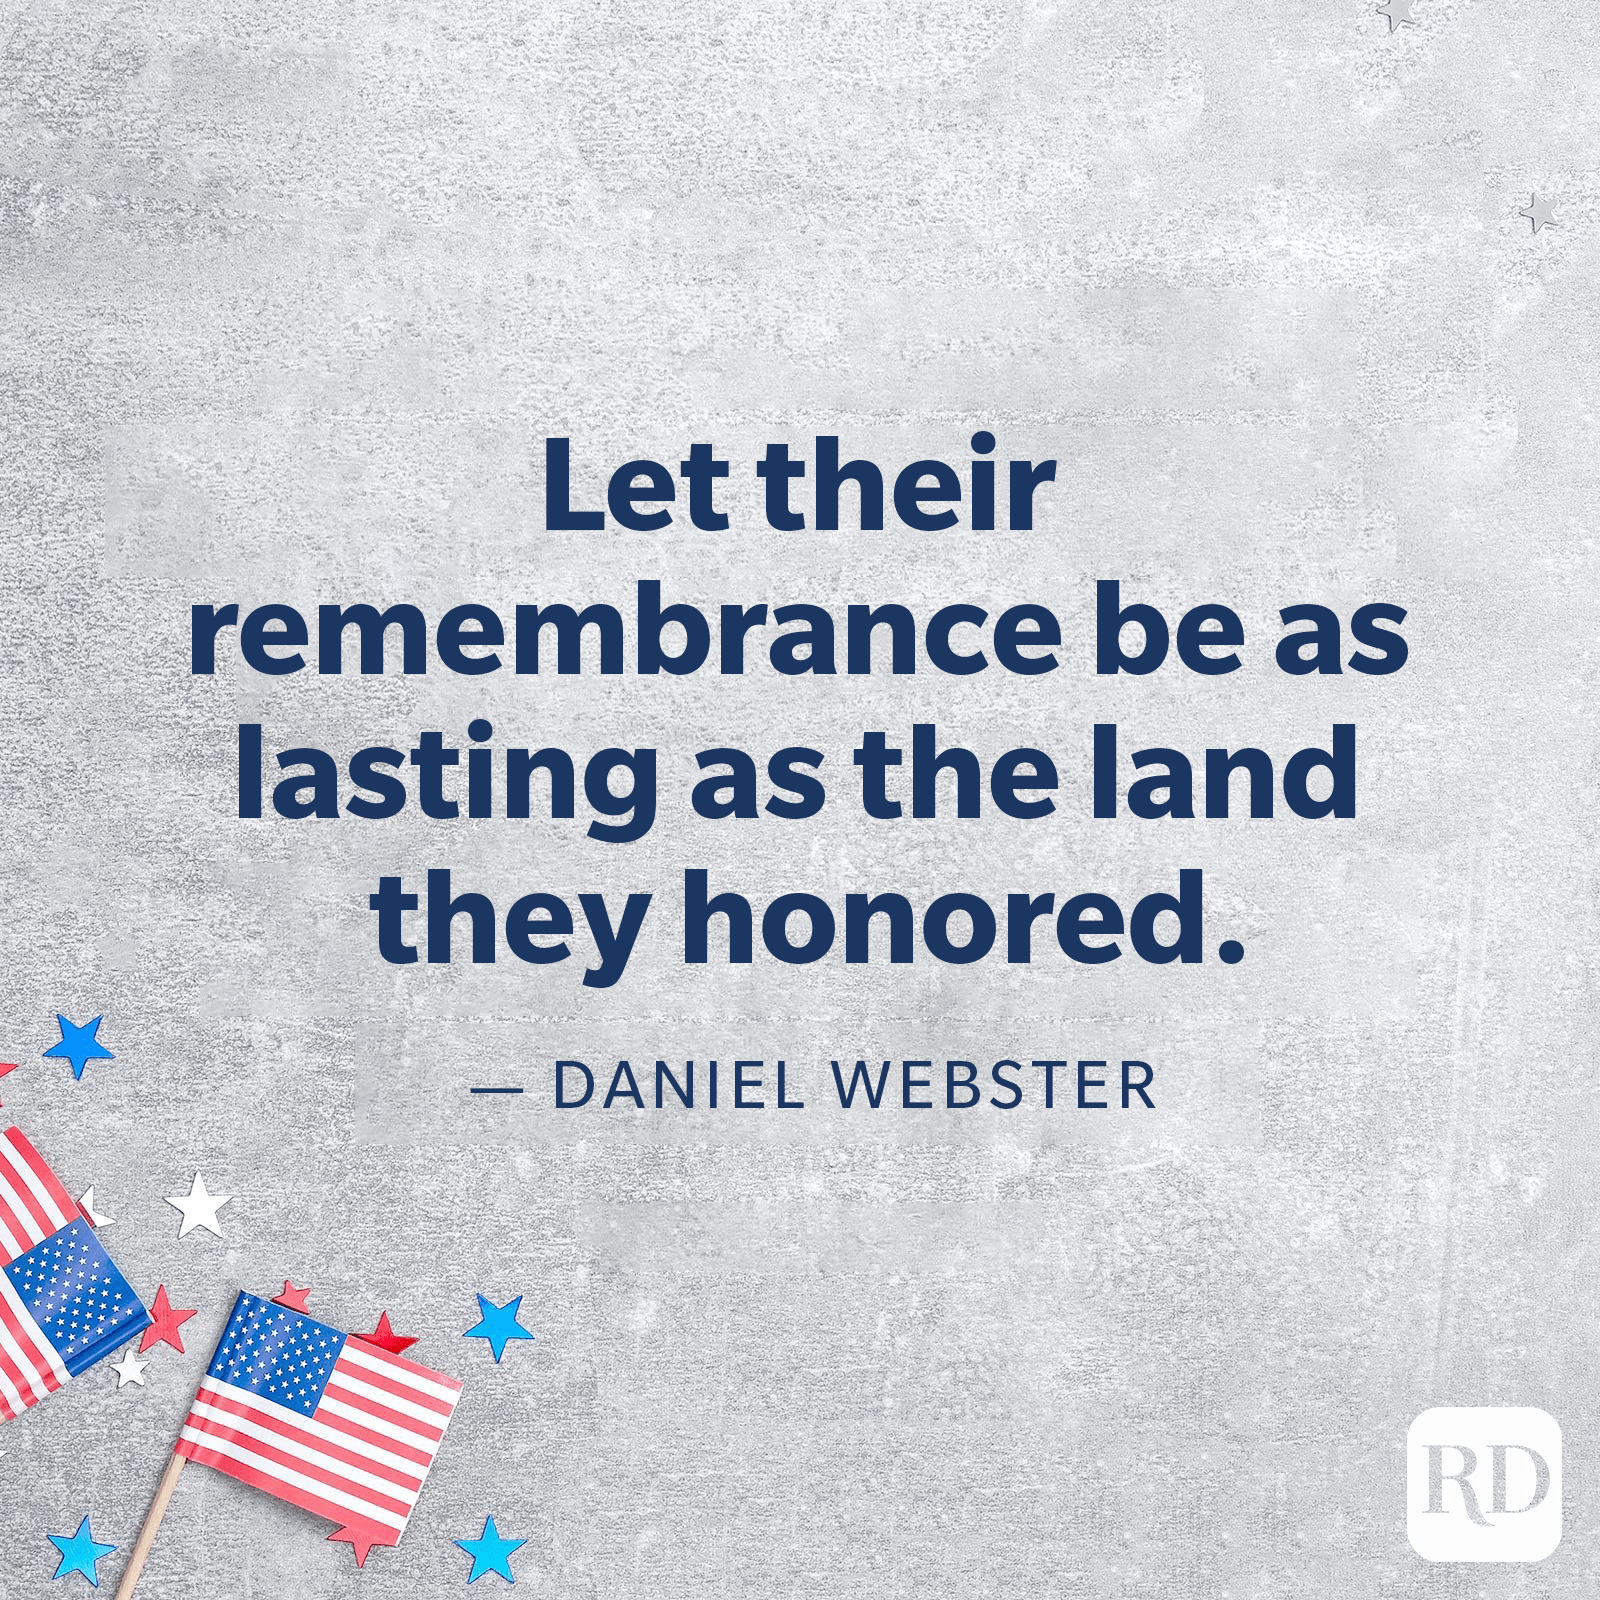 Memorial Day Quotes: 50 Quotes About Memorial Day to Share